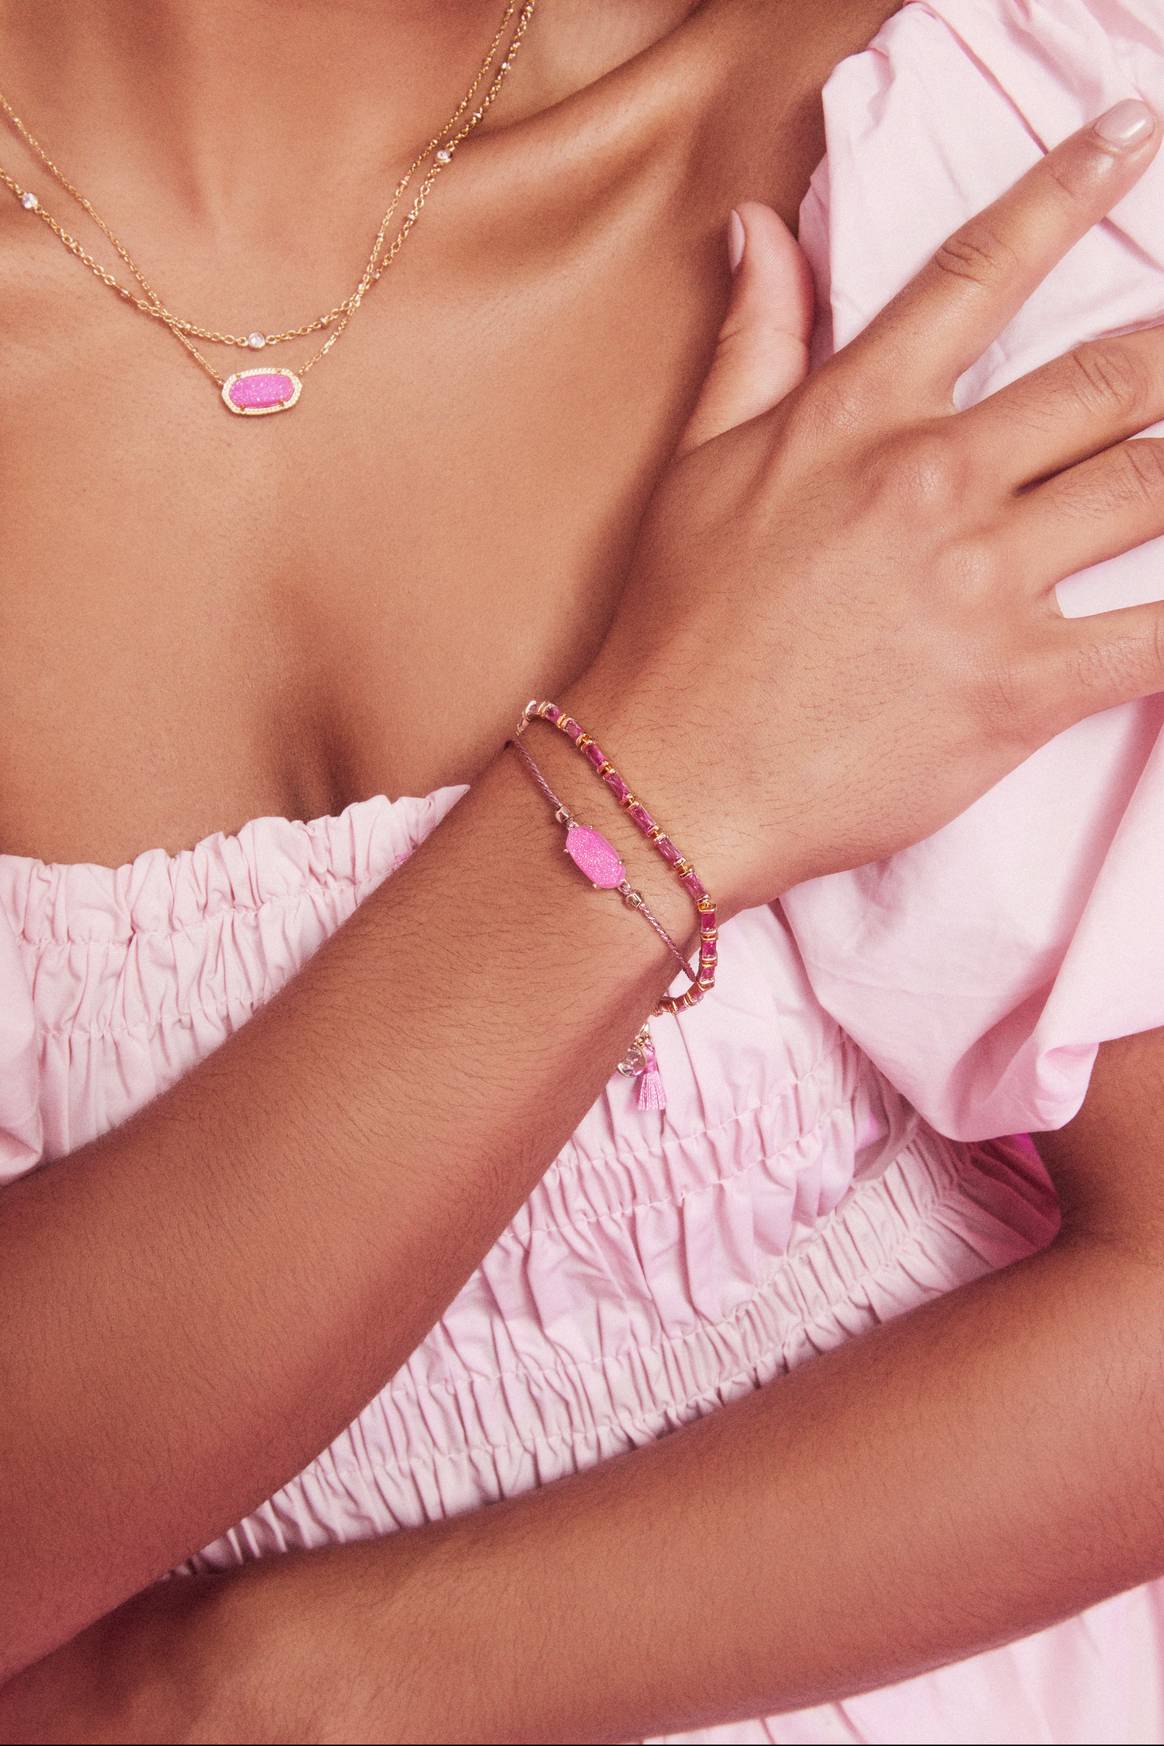 Kendra Scott launches Barbie jewelry collaboration